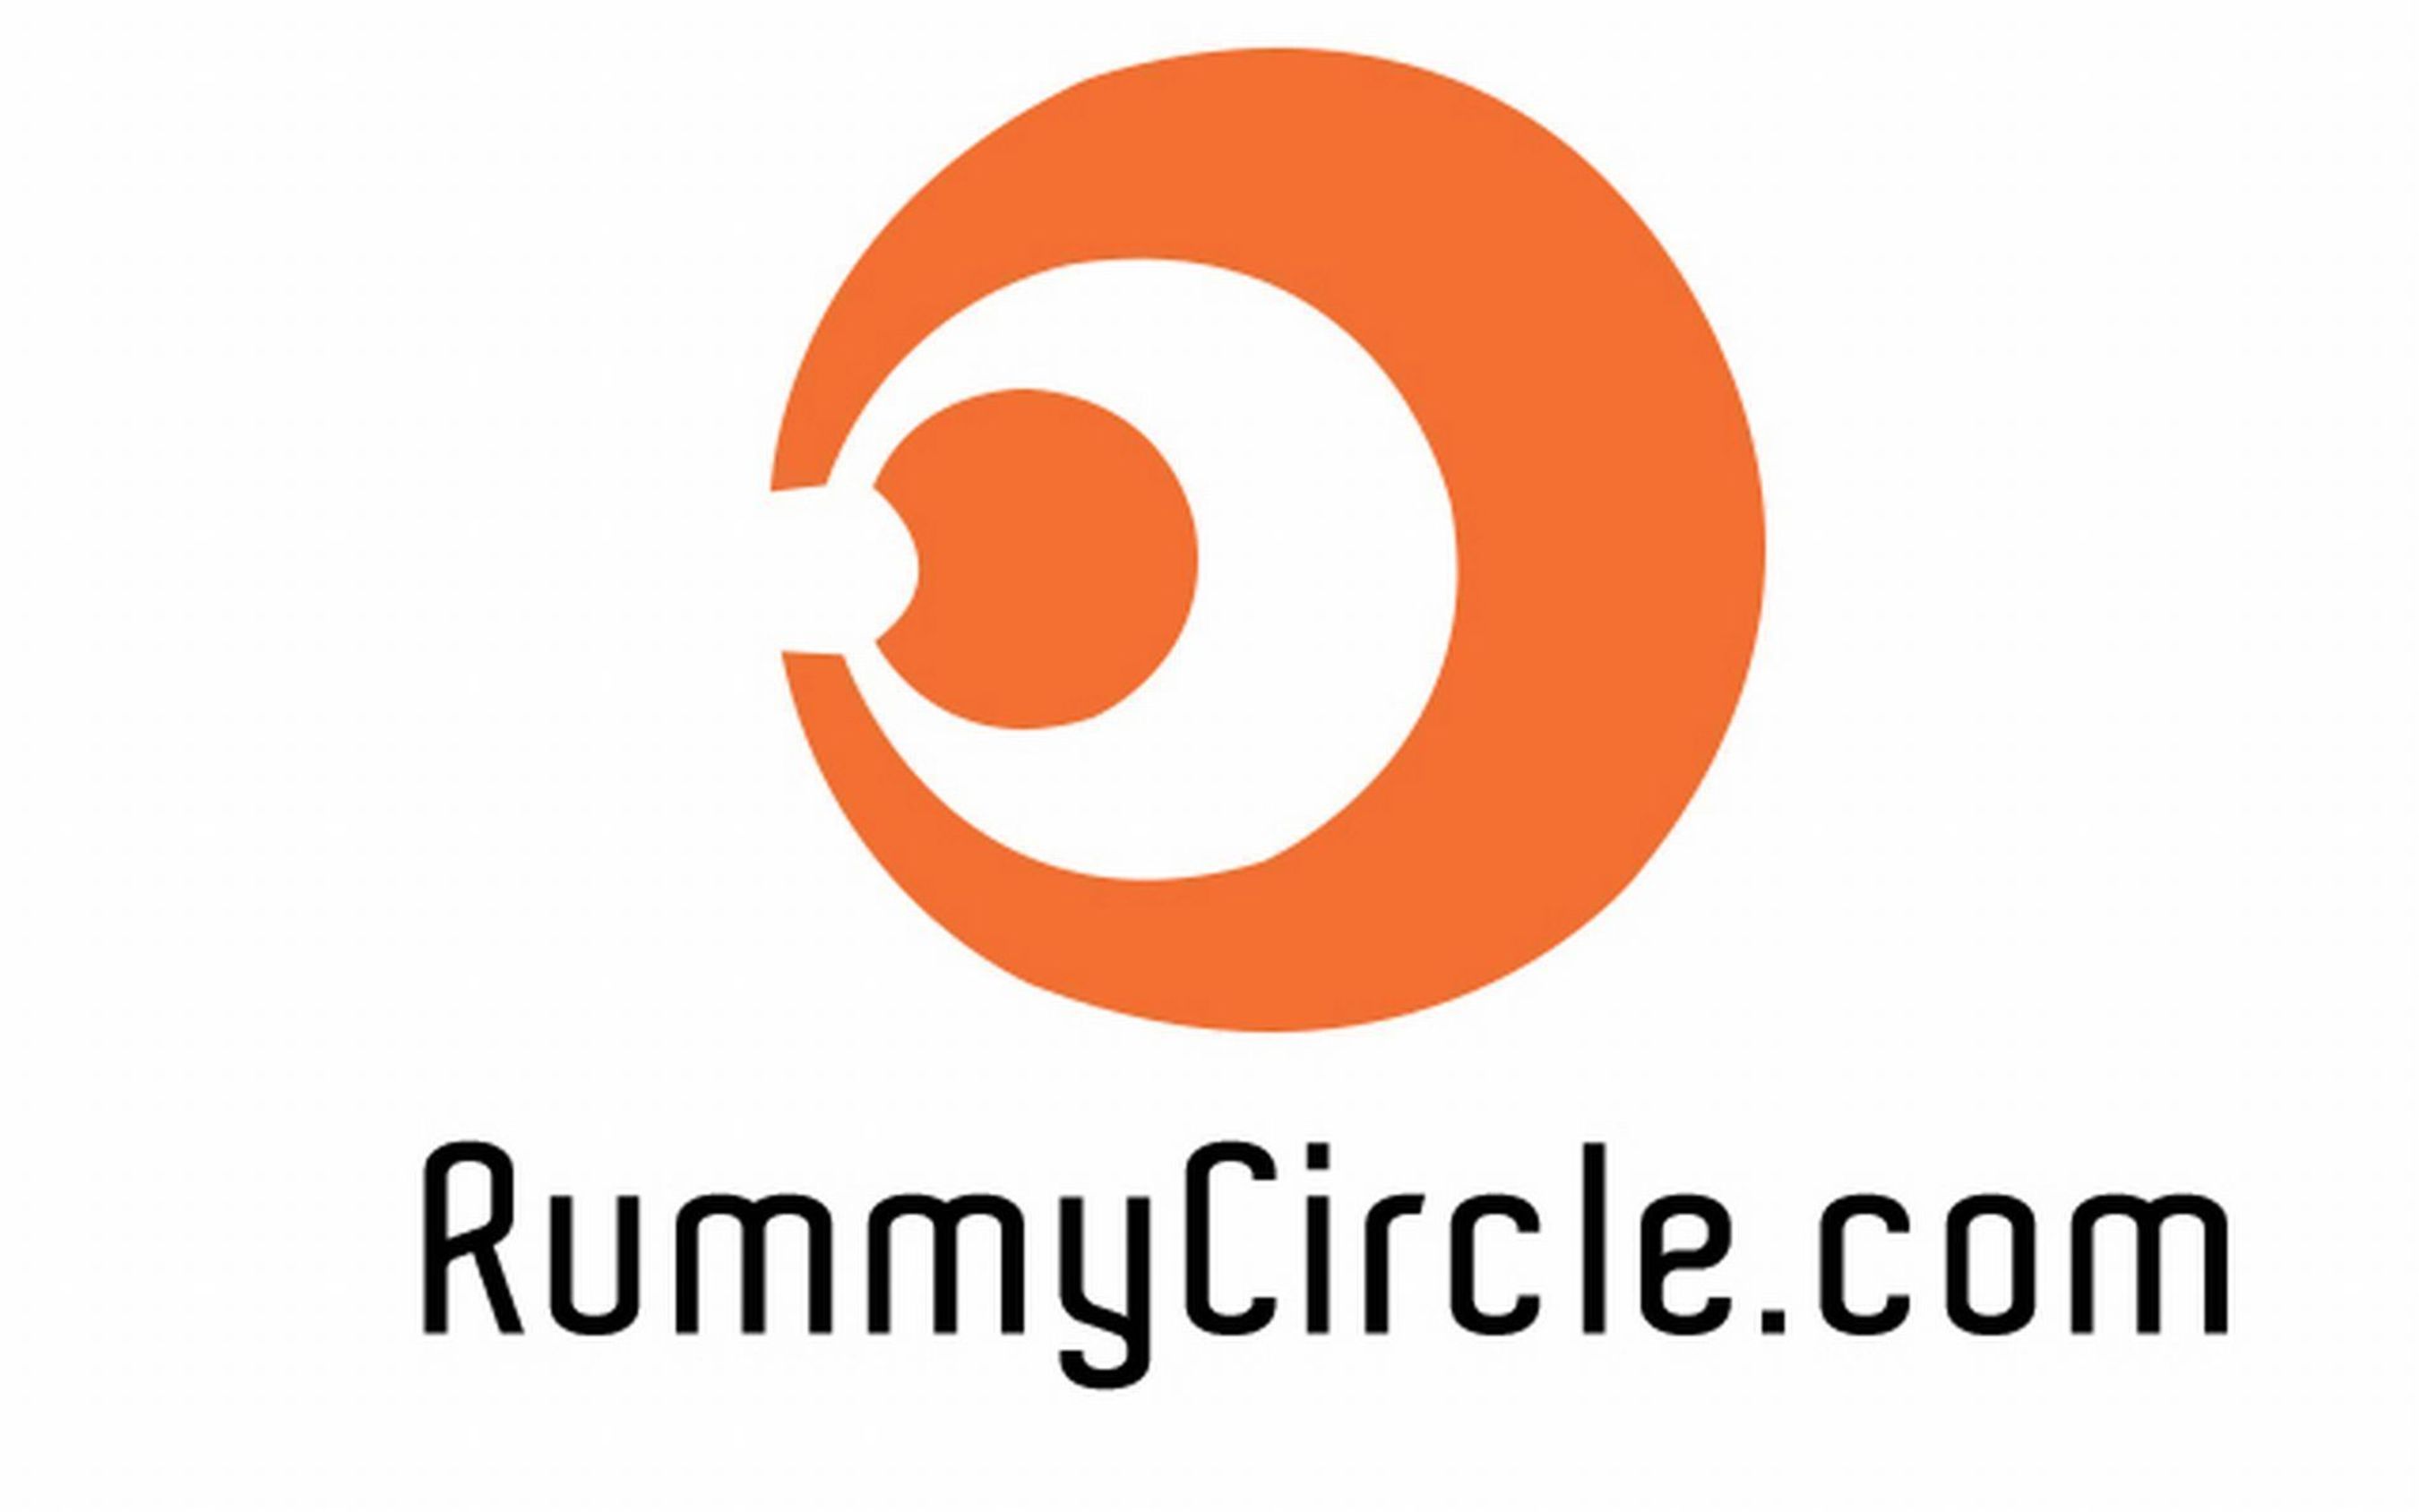 RummyCircle.com – First and Only Site Offering Rummy for Cash on Mobile